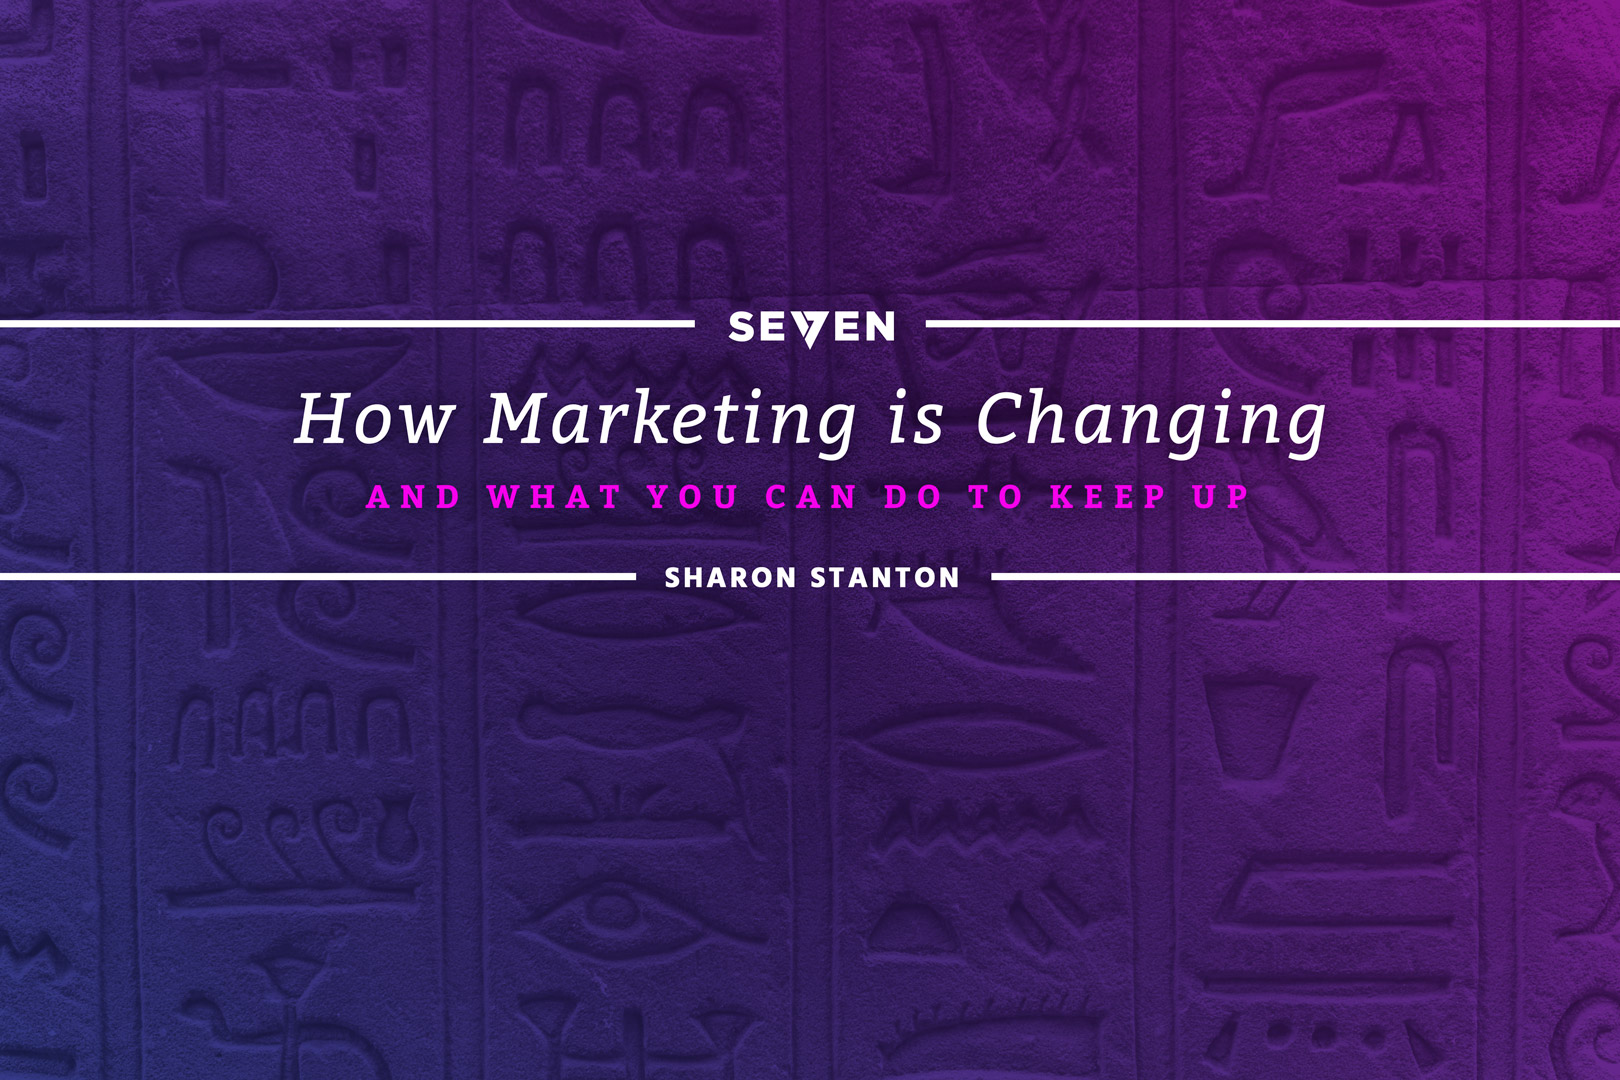 How Marketing is Changing and What You Can Do to Keep Up